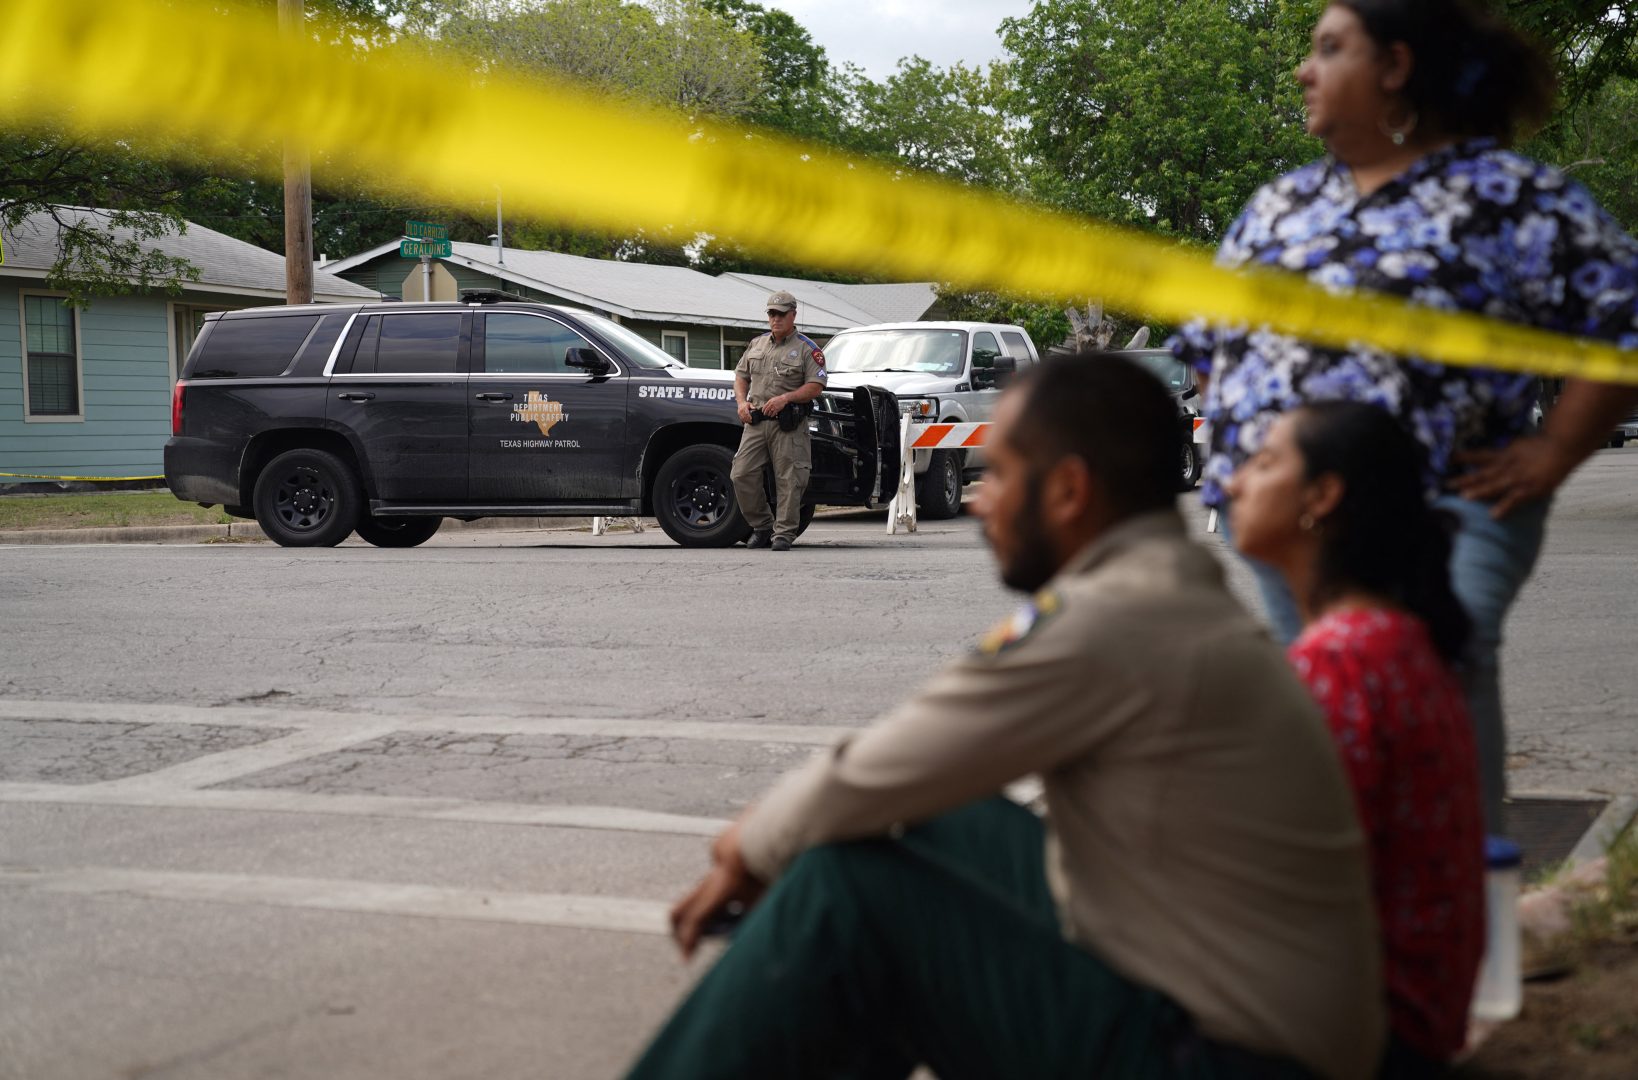 TOPSHOT - People sit on the curb outside of Robb Elementary School as State troopers guard the area in Uvalde, Texas, on May 24, 2022. - An 18-year-old gunman killed 14 children and a teacher at an elementary school in Texas on Tuesday, according to the state's governor, in the nation's deadliest school shooting in years. 